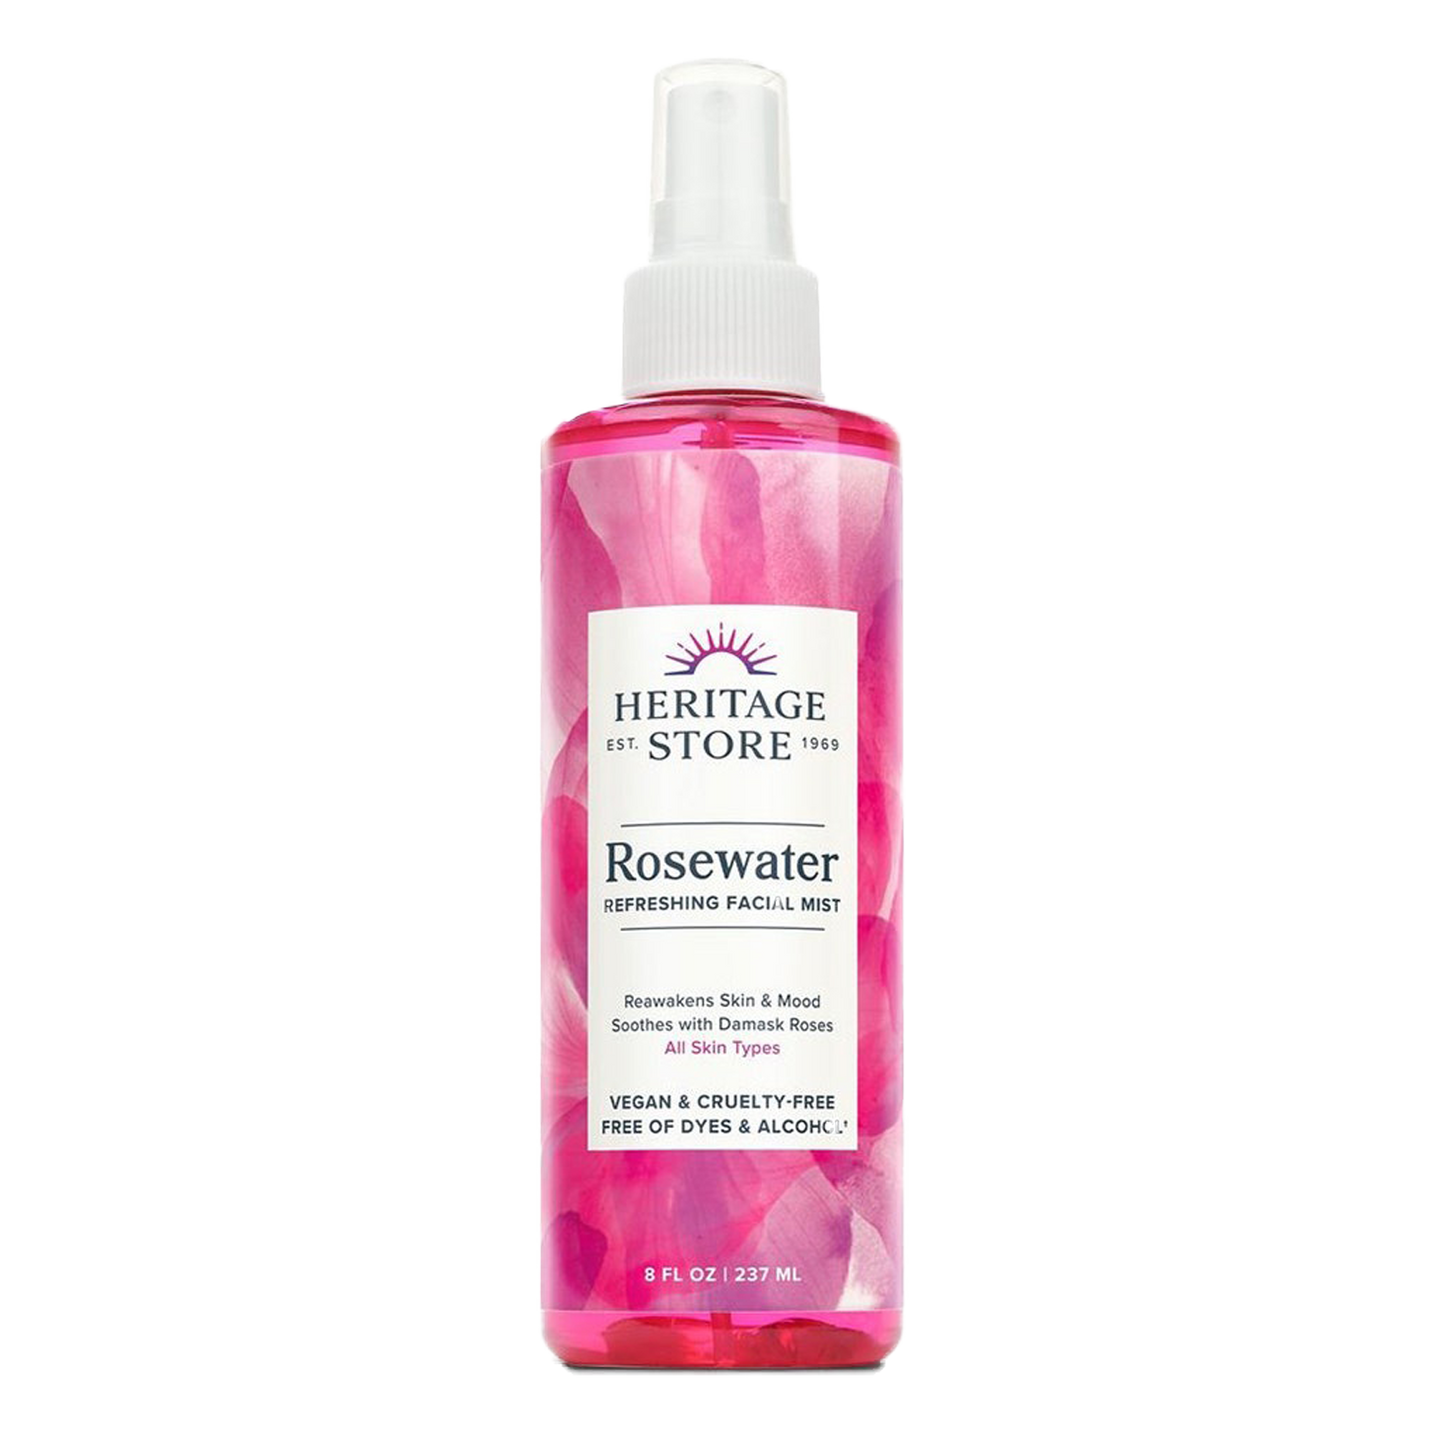 Heritage Store - Rosewater Facial Mist (8 oz)